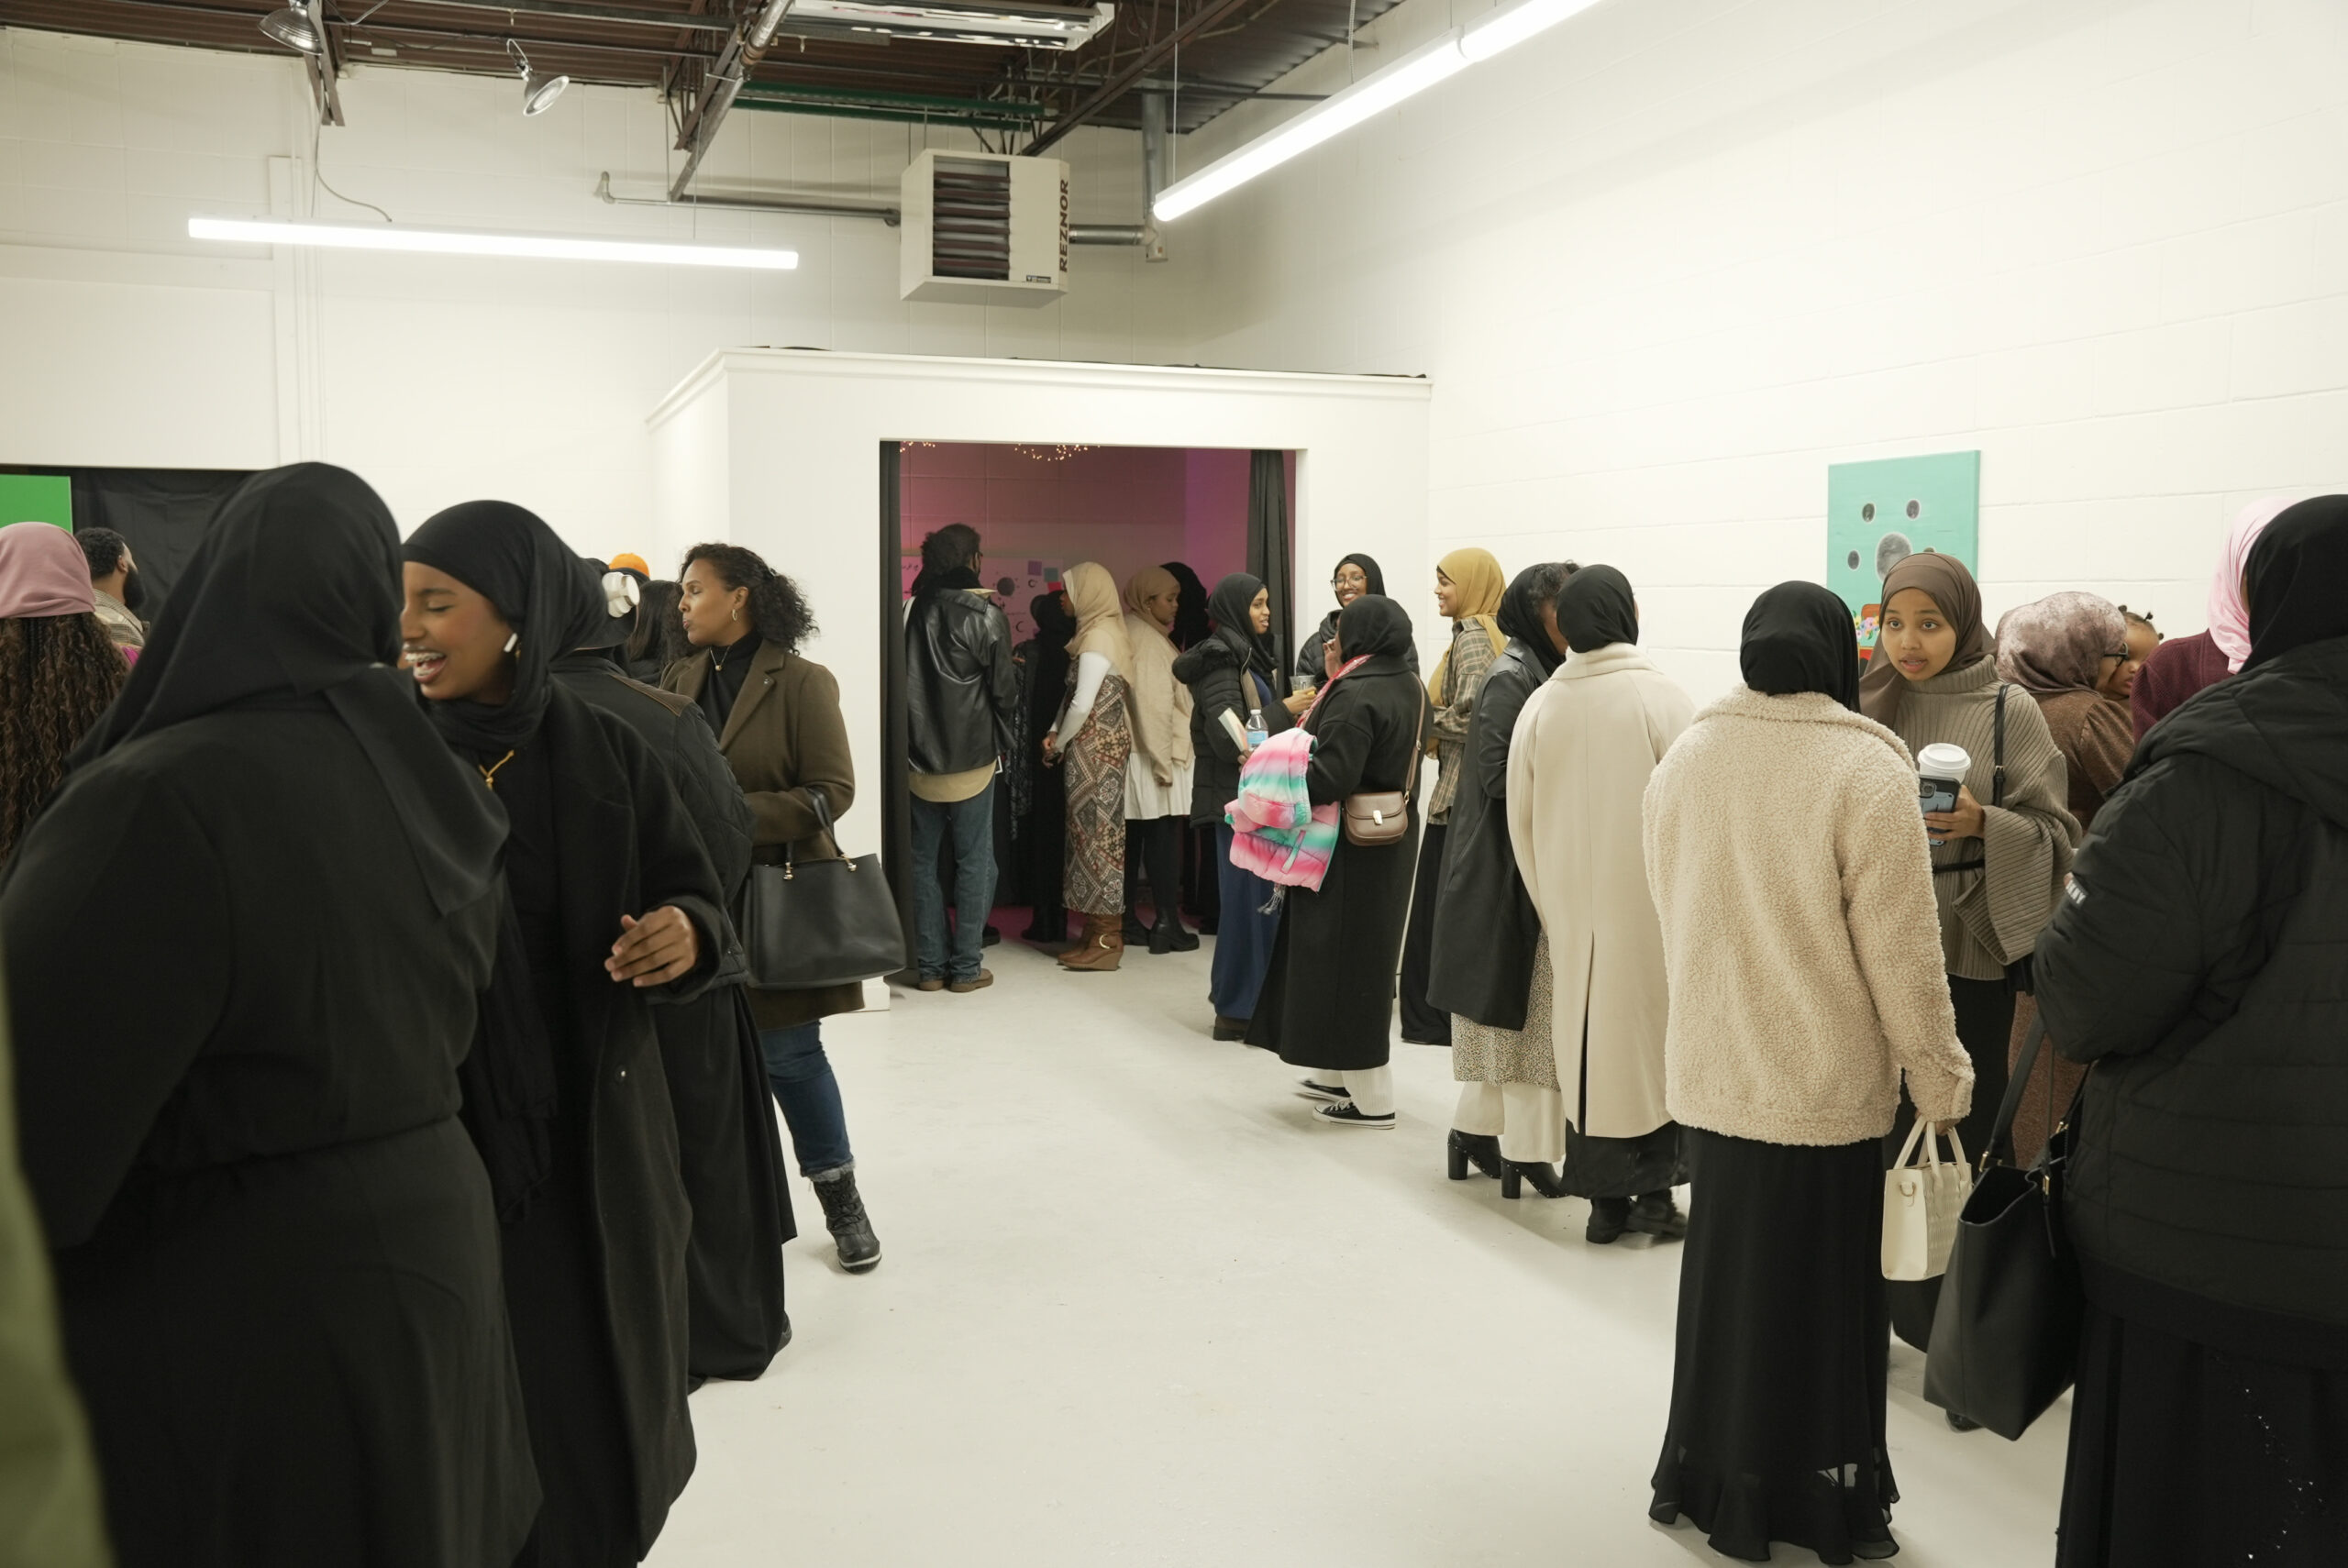 Attendees gather at the center of the gallery space following an artist talk at Soomaal House in Minneapolis, MN. The white walls, in frame, surrounding them have small to medium-sized two-dimensional works of art.